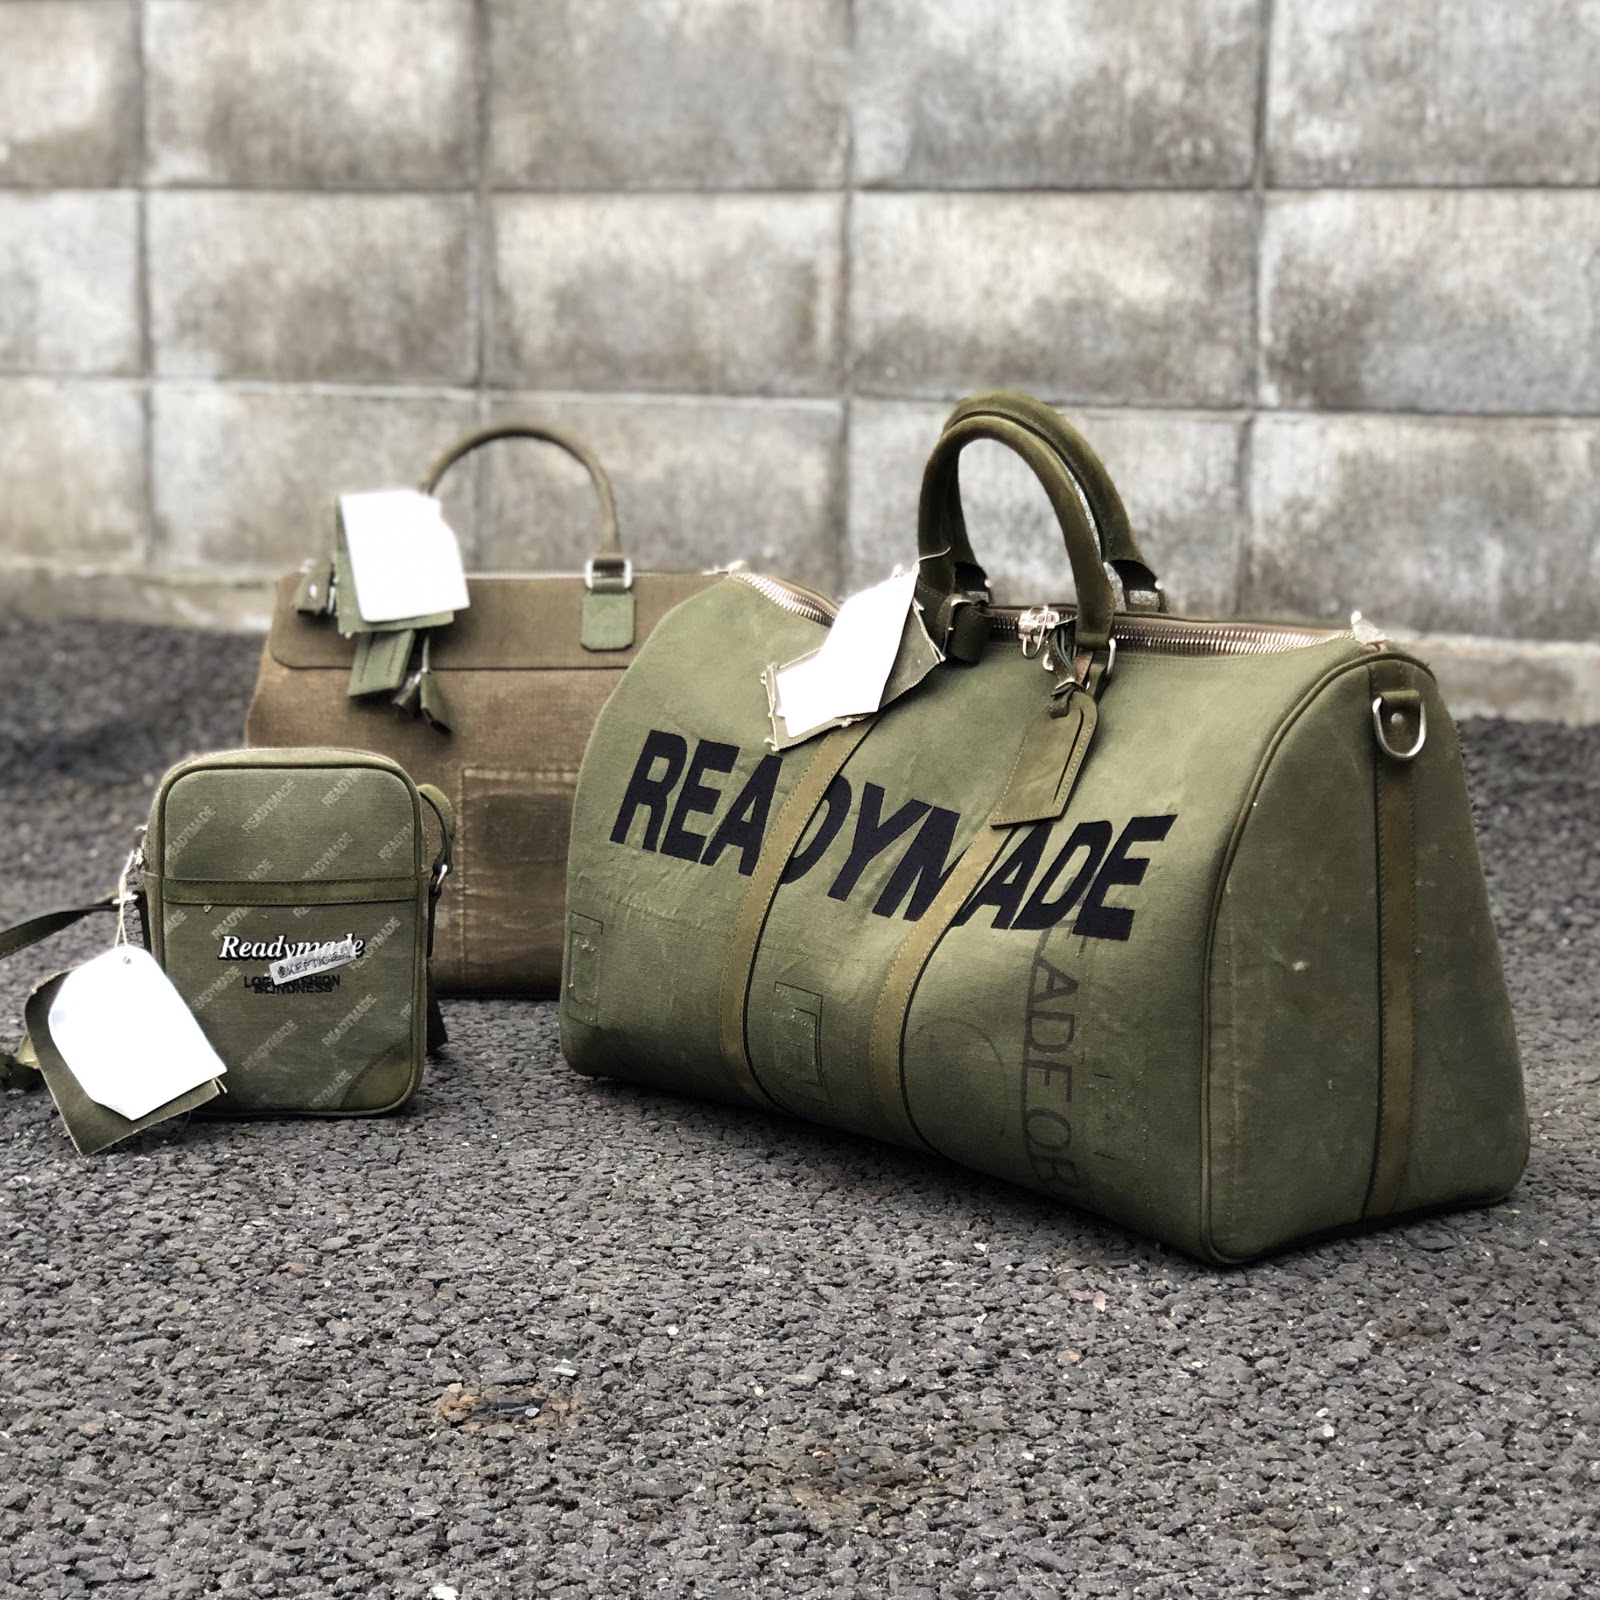 CLOT Teams up With READYMADE on Duffel Bag Collaboration – JUICESTORE